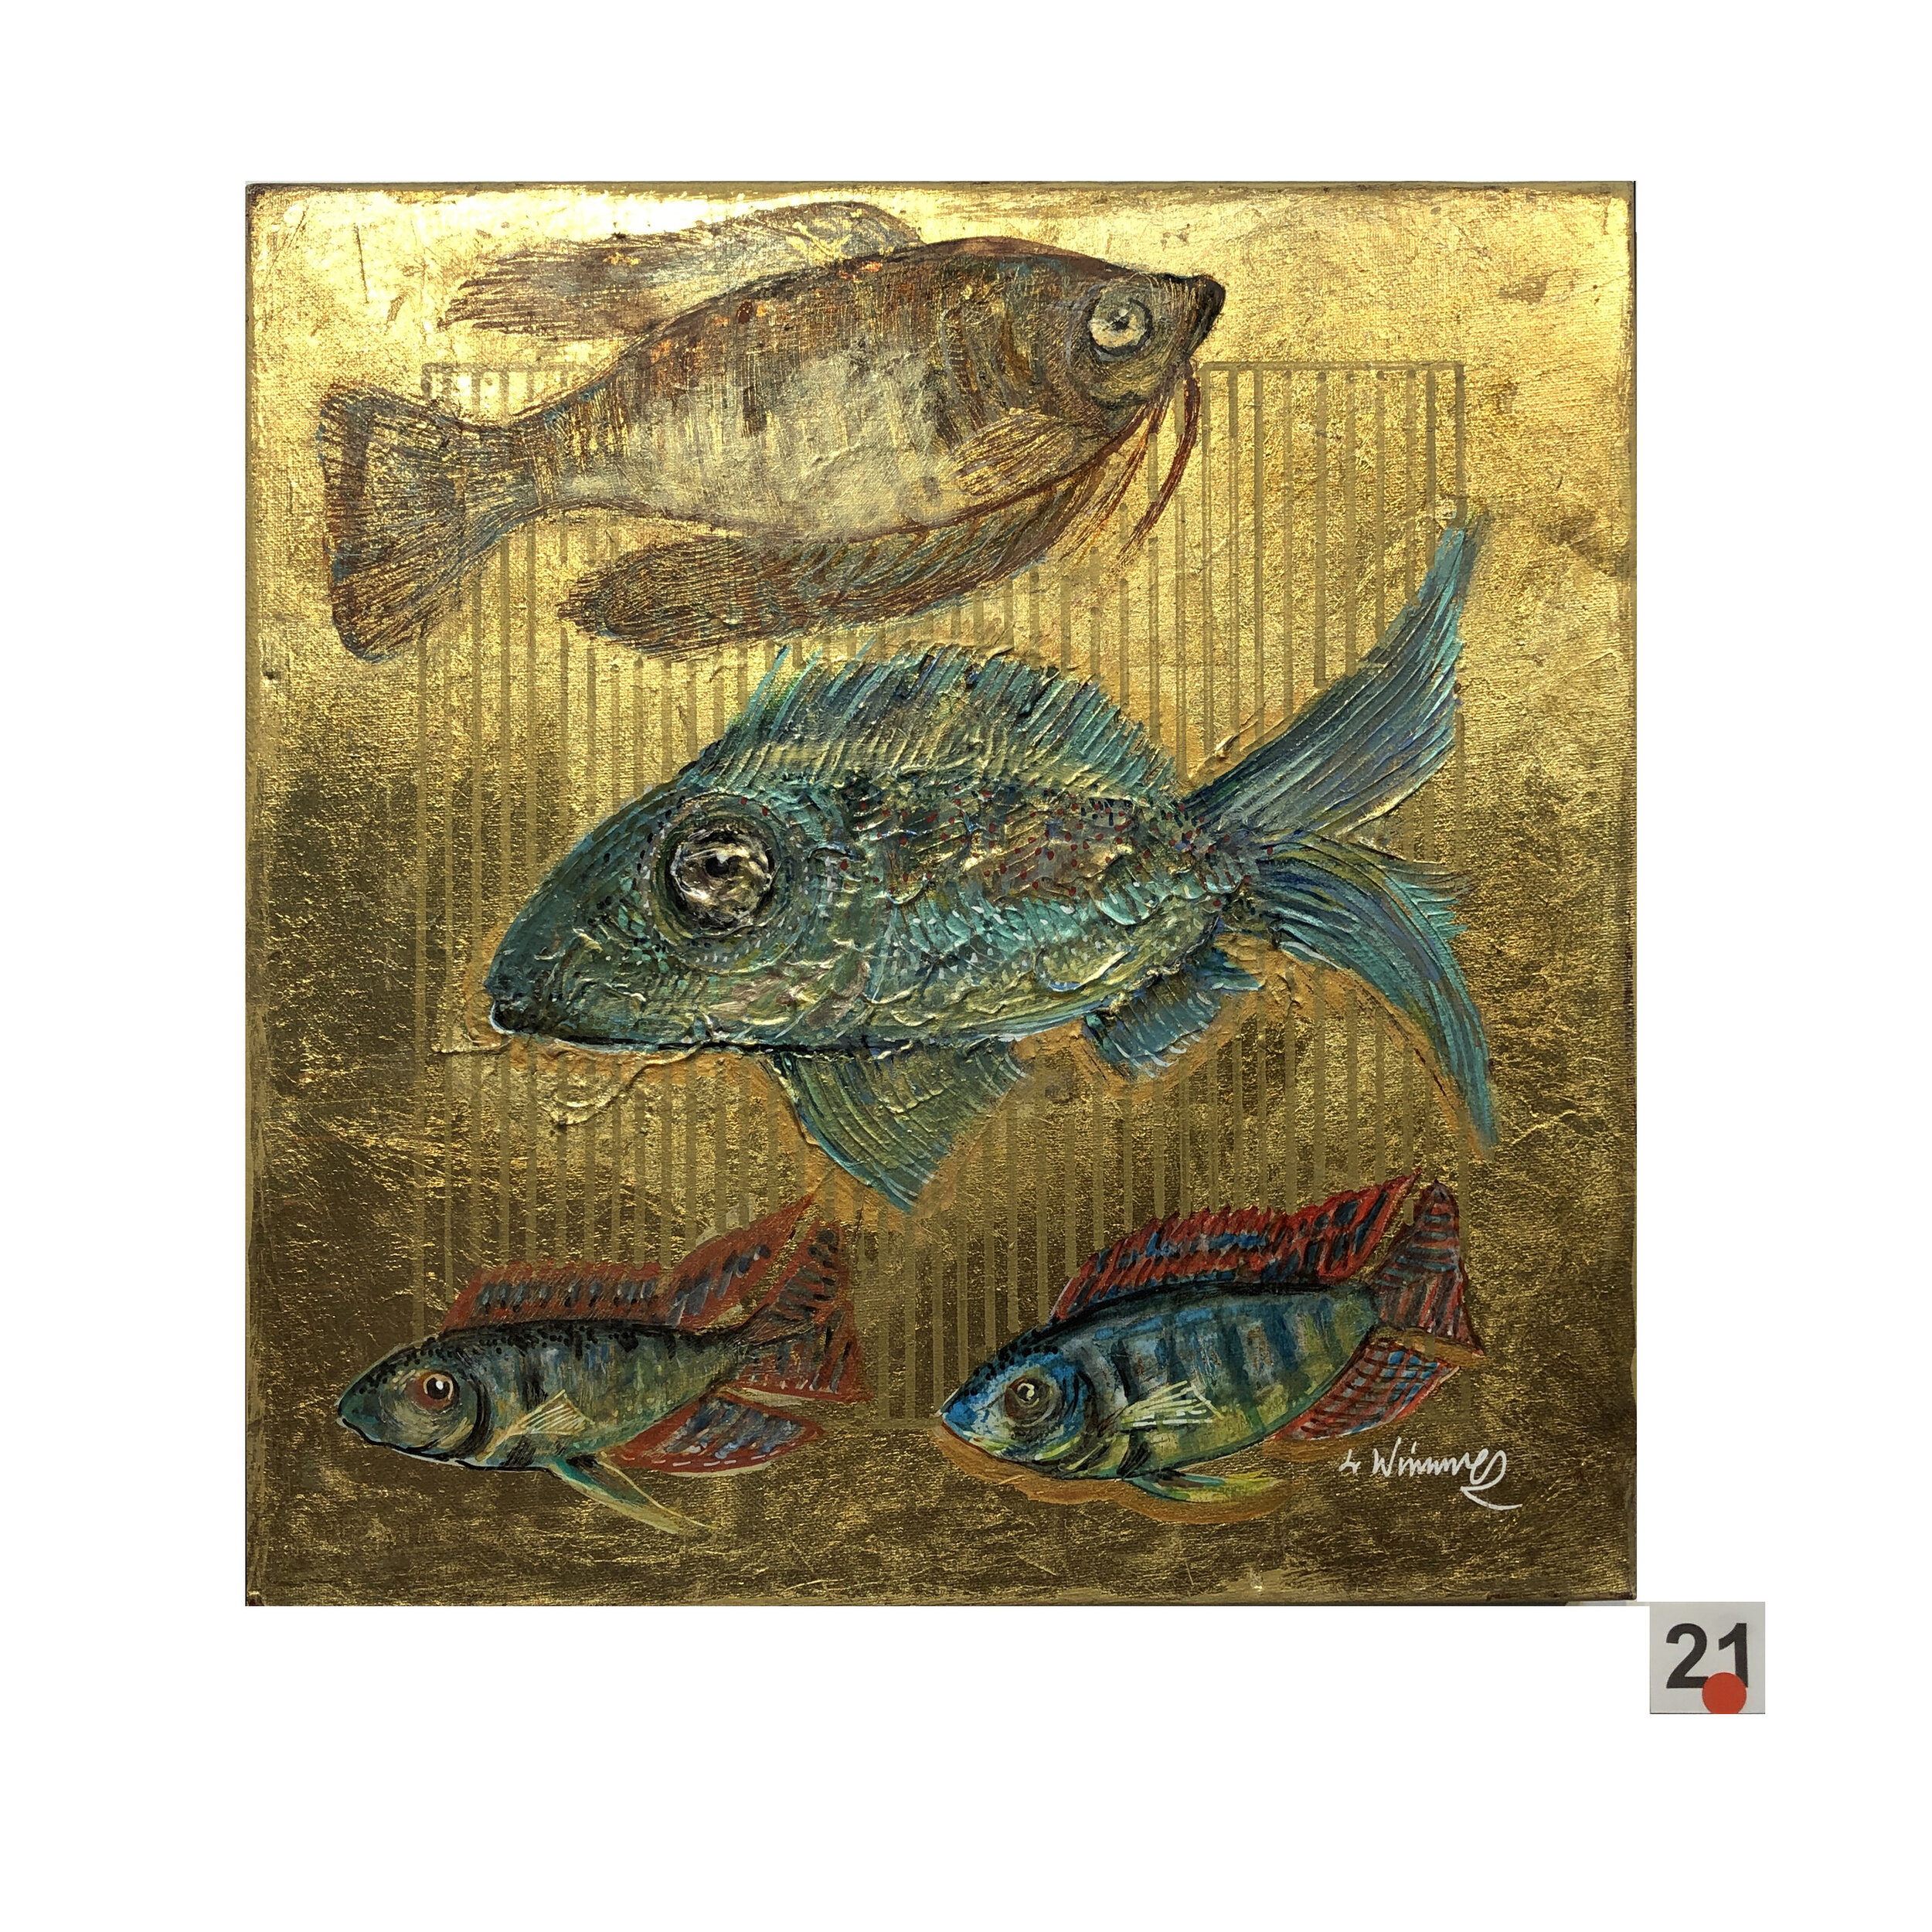  “Fish in a Golden Sea” 